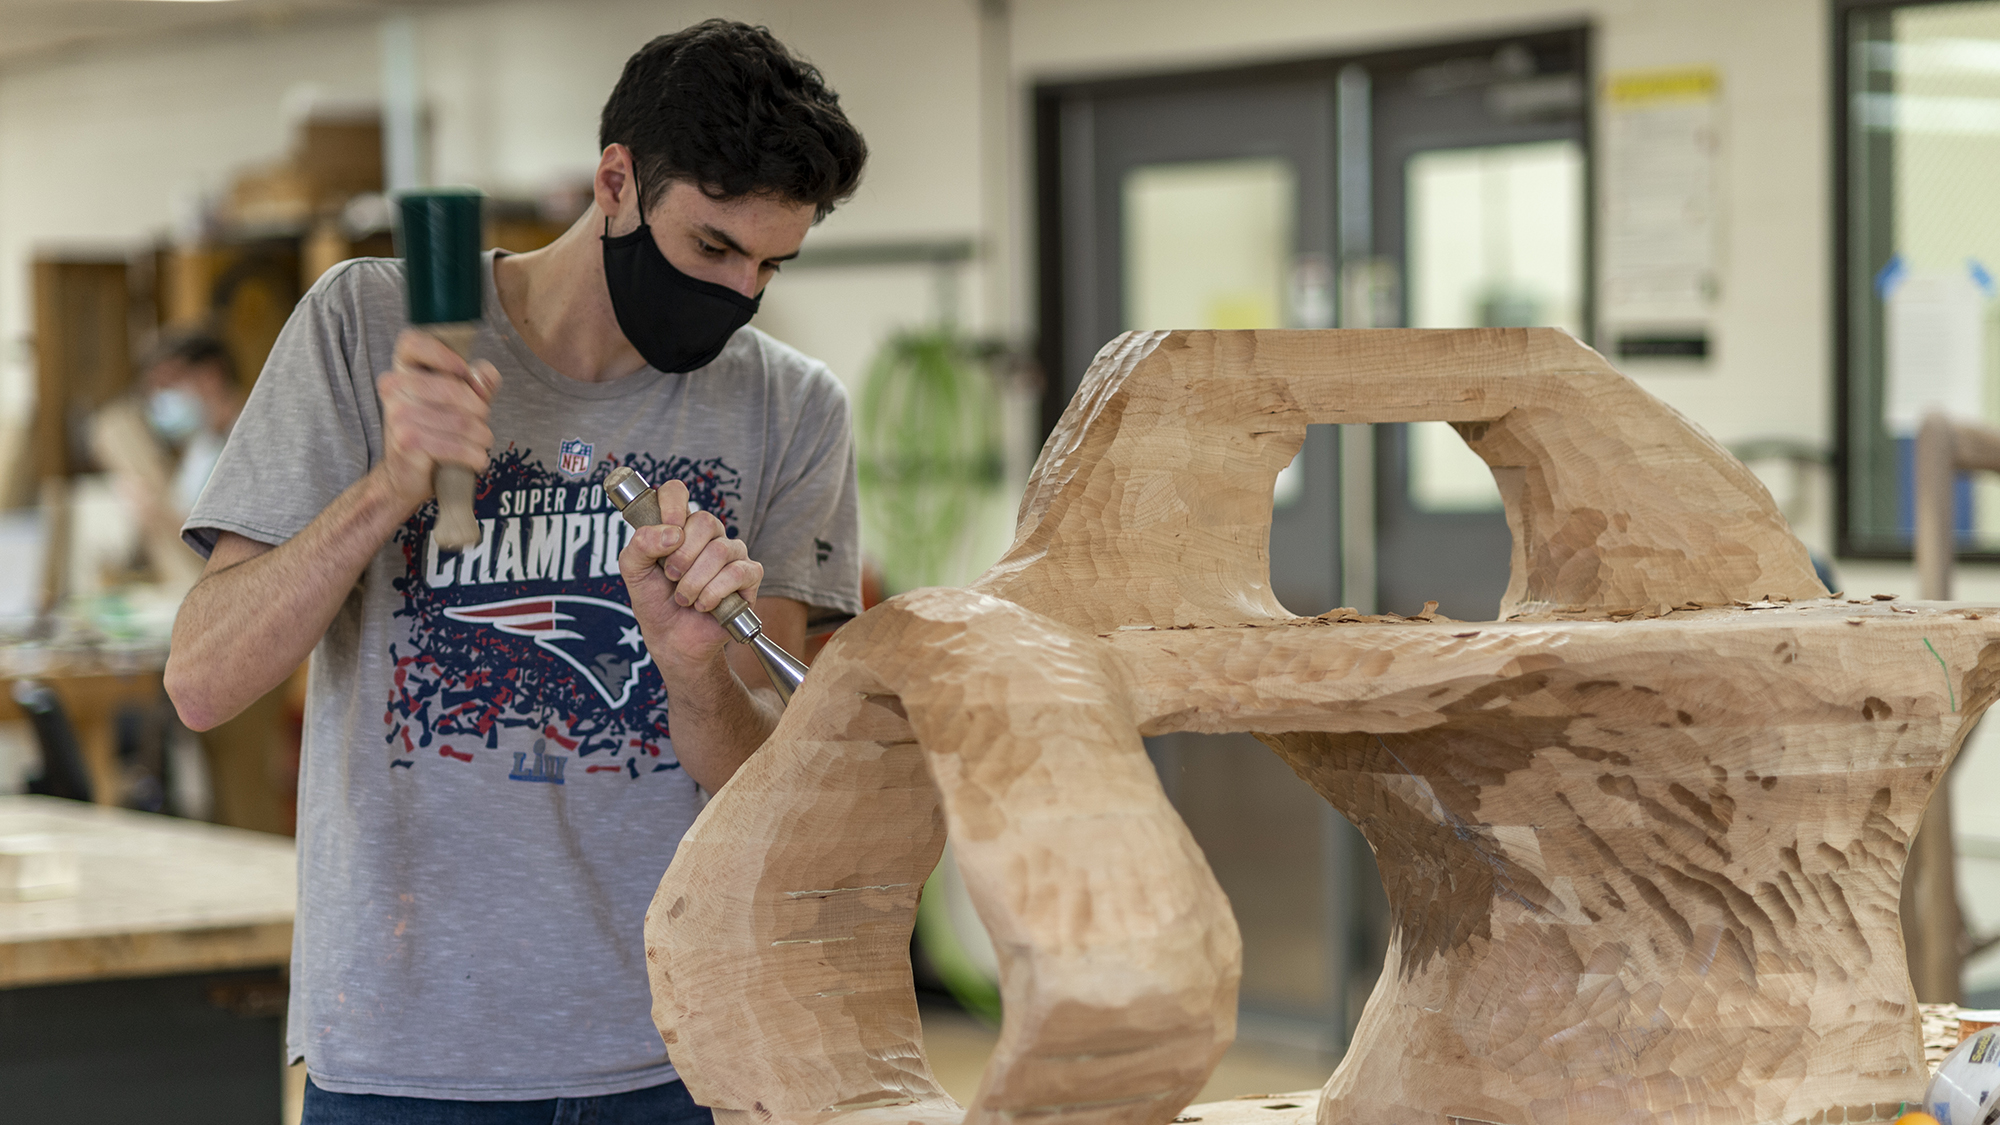 Furniture design student Jared Abner '21 works on a chair project in the bench room.